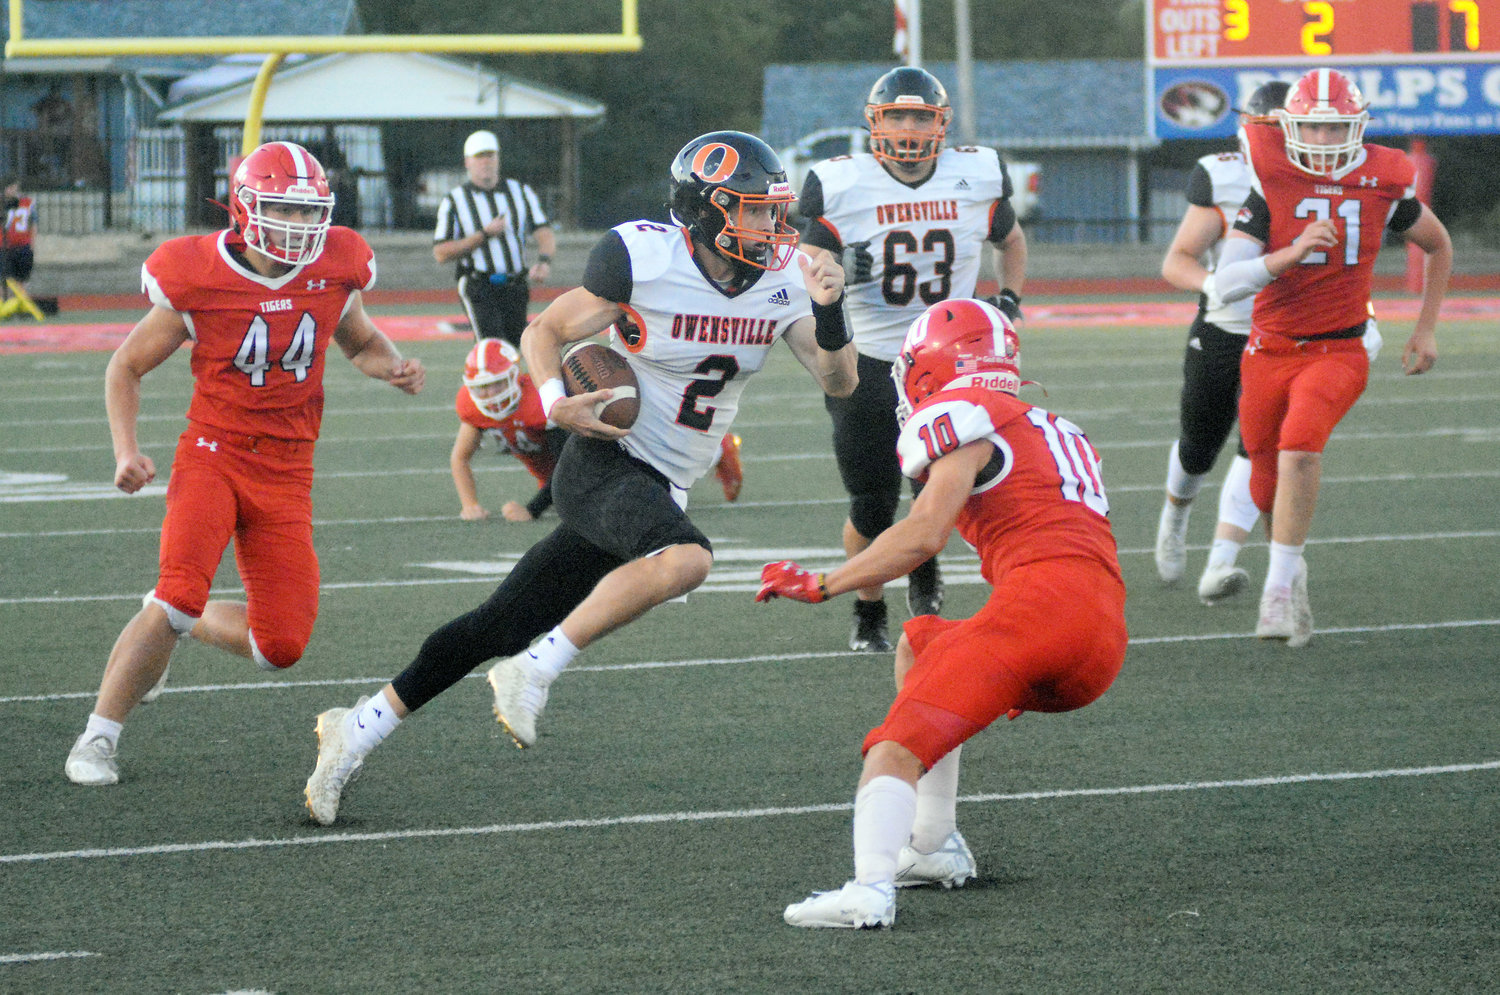 Brendan Decker (above, center) looks for open field to run in Friday night for Owensville’s Dutchmen during their 60-11 victory Friday night in Phelps County over St. James’ Tigers. Hayden Shoemaker (63) runs down the field hoping Decker finds the end zone.